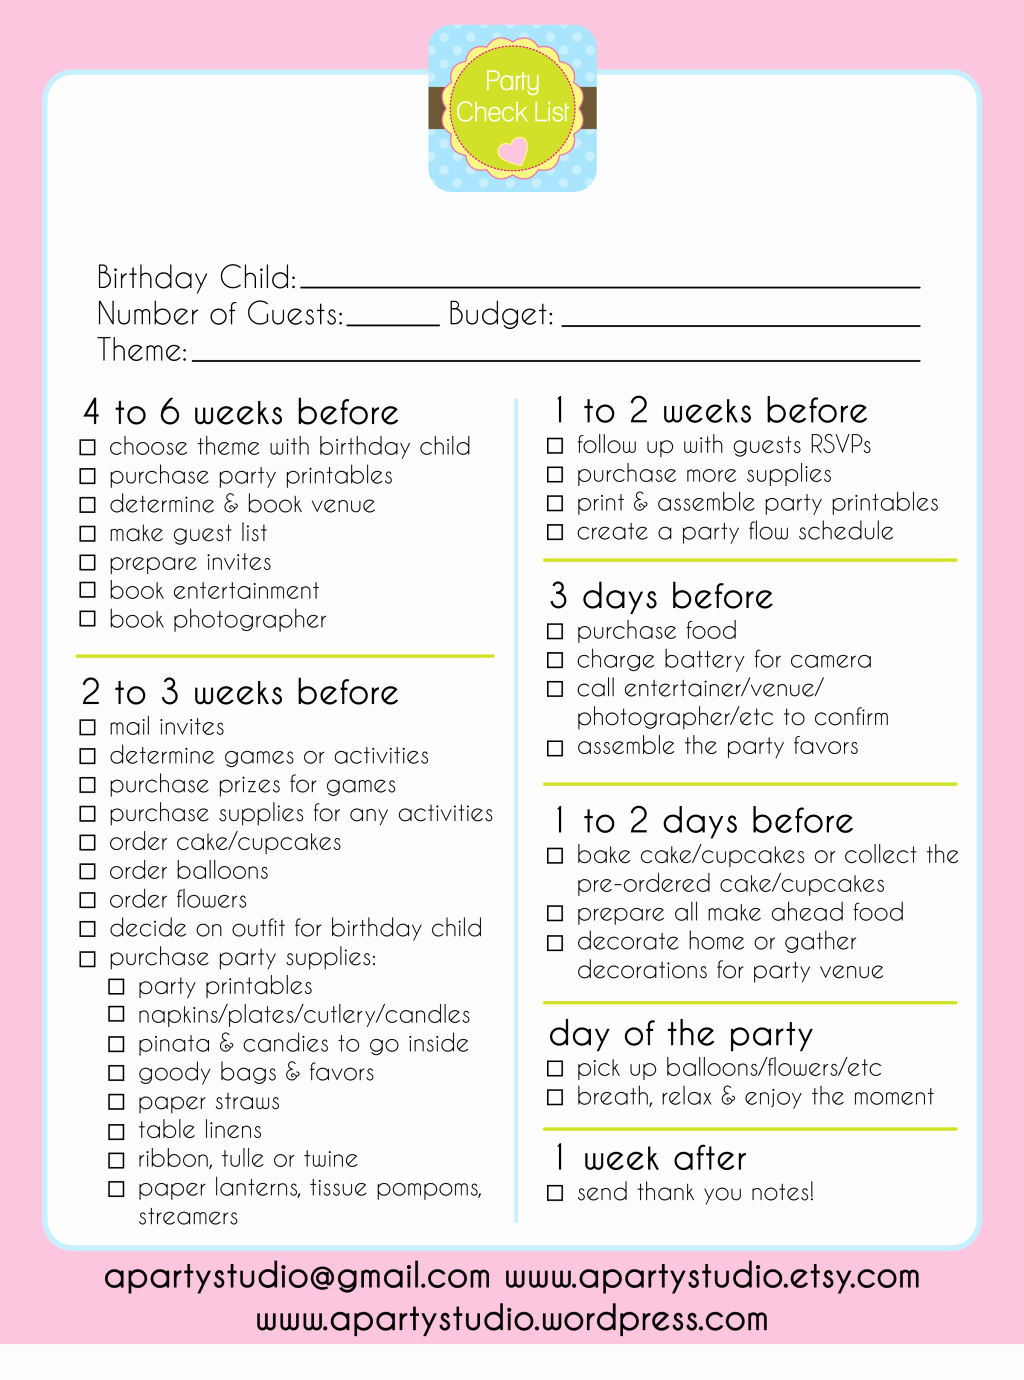 Party Plan Checklist Template Fresh Free Printable Party Checklist